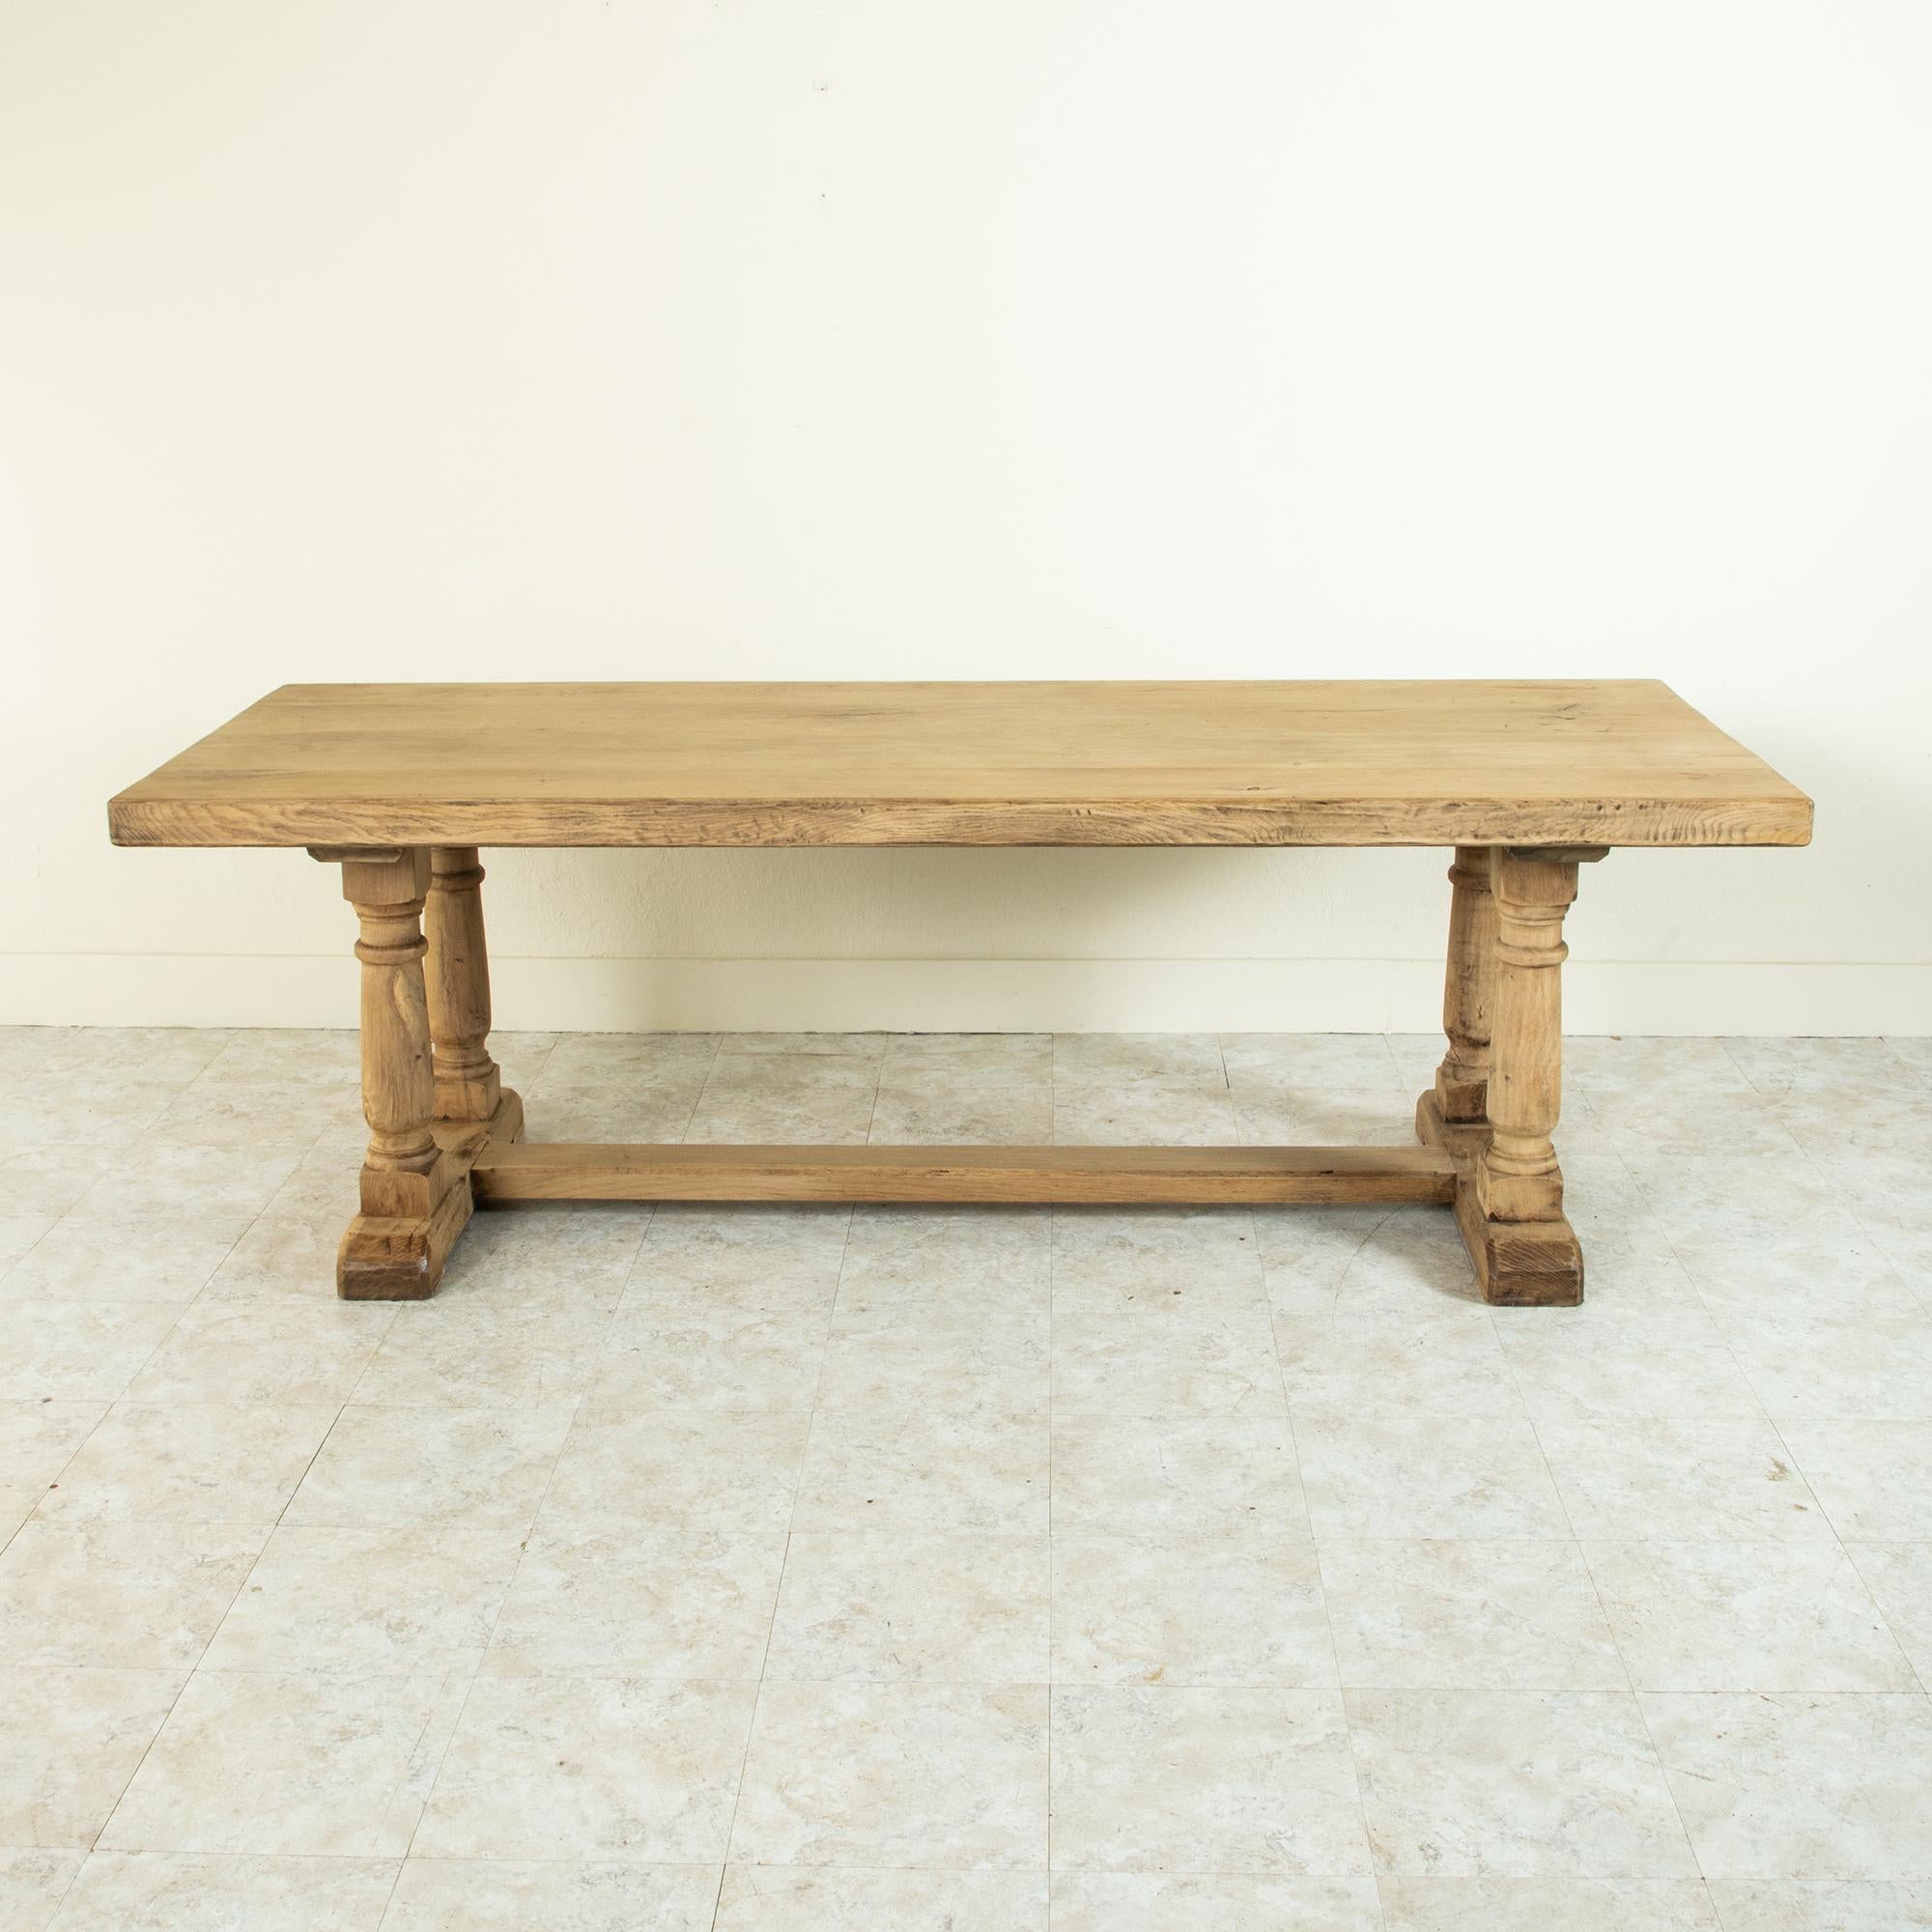 Found in the region of Normandy, France, this artisan-made oak farm table or dining table from the late nineteenth century features a 2.75 inch thick top constructed of four planks of wood. Three splines run the entire length of the table to join